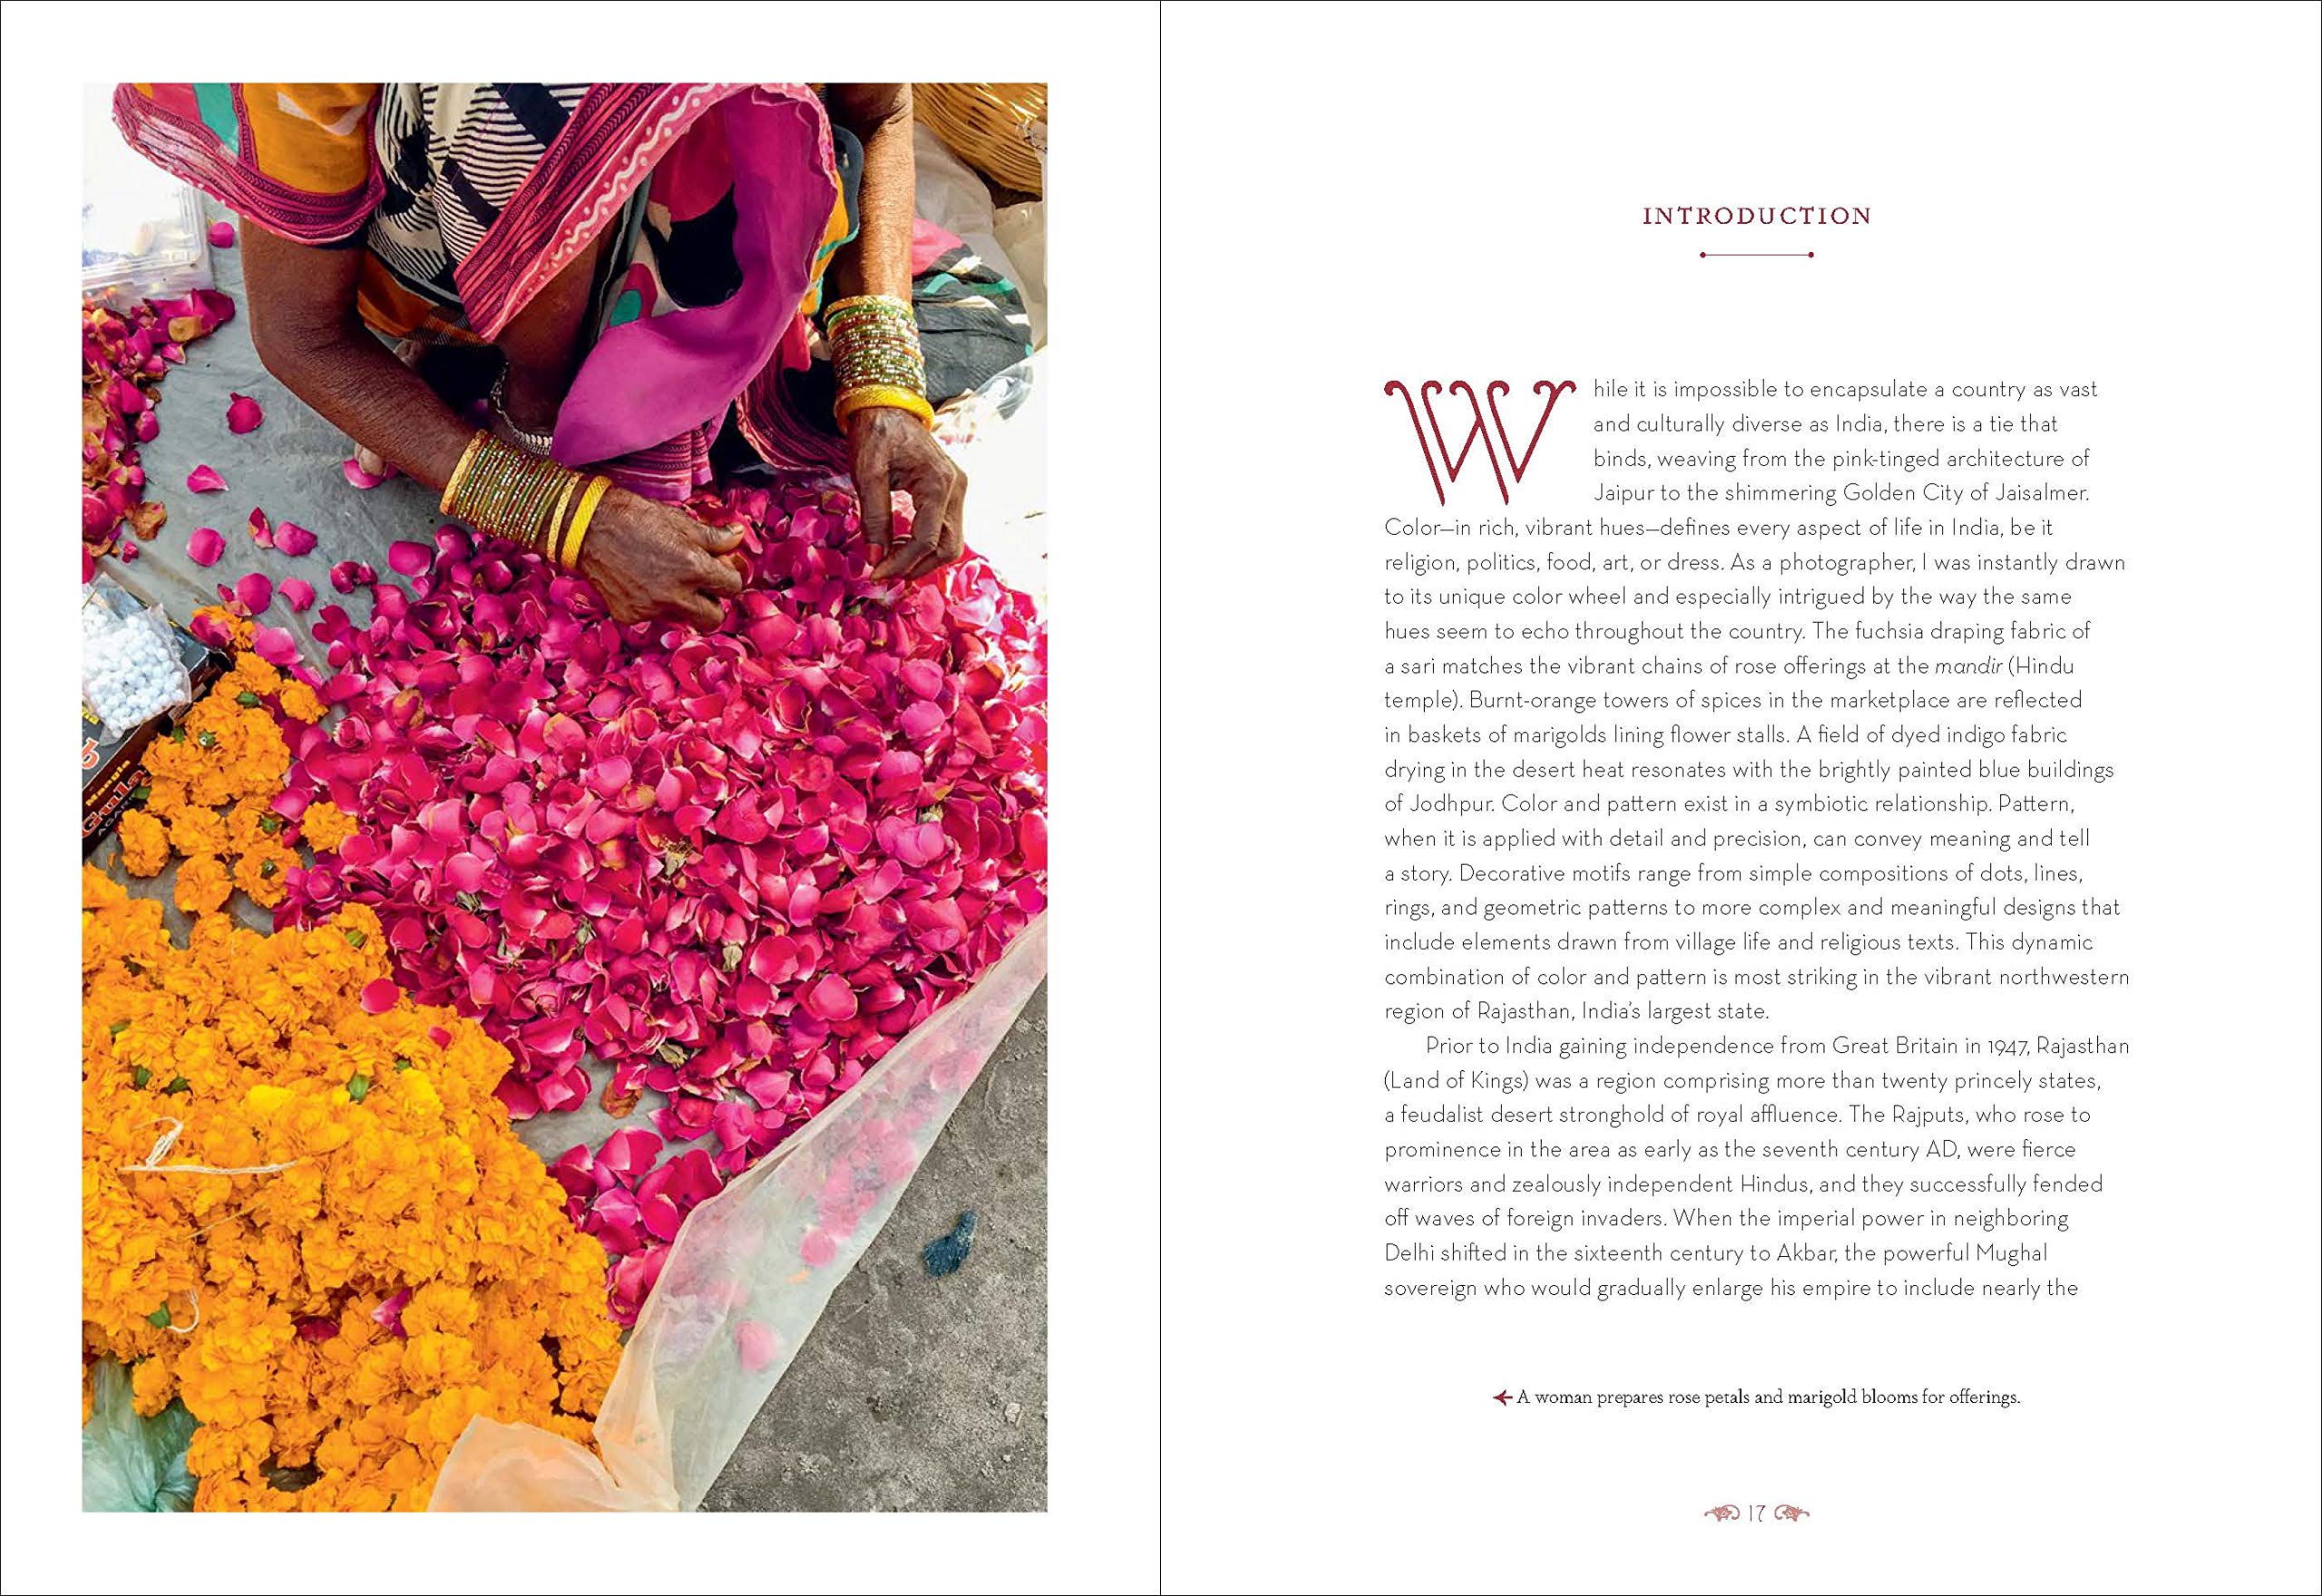 Patterns of India: A Journey Through Colors, Textiles, and the Vibrancy of Rajasthan